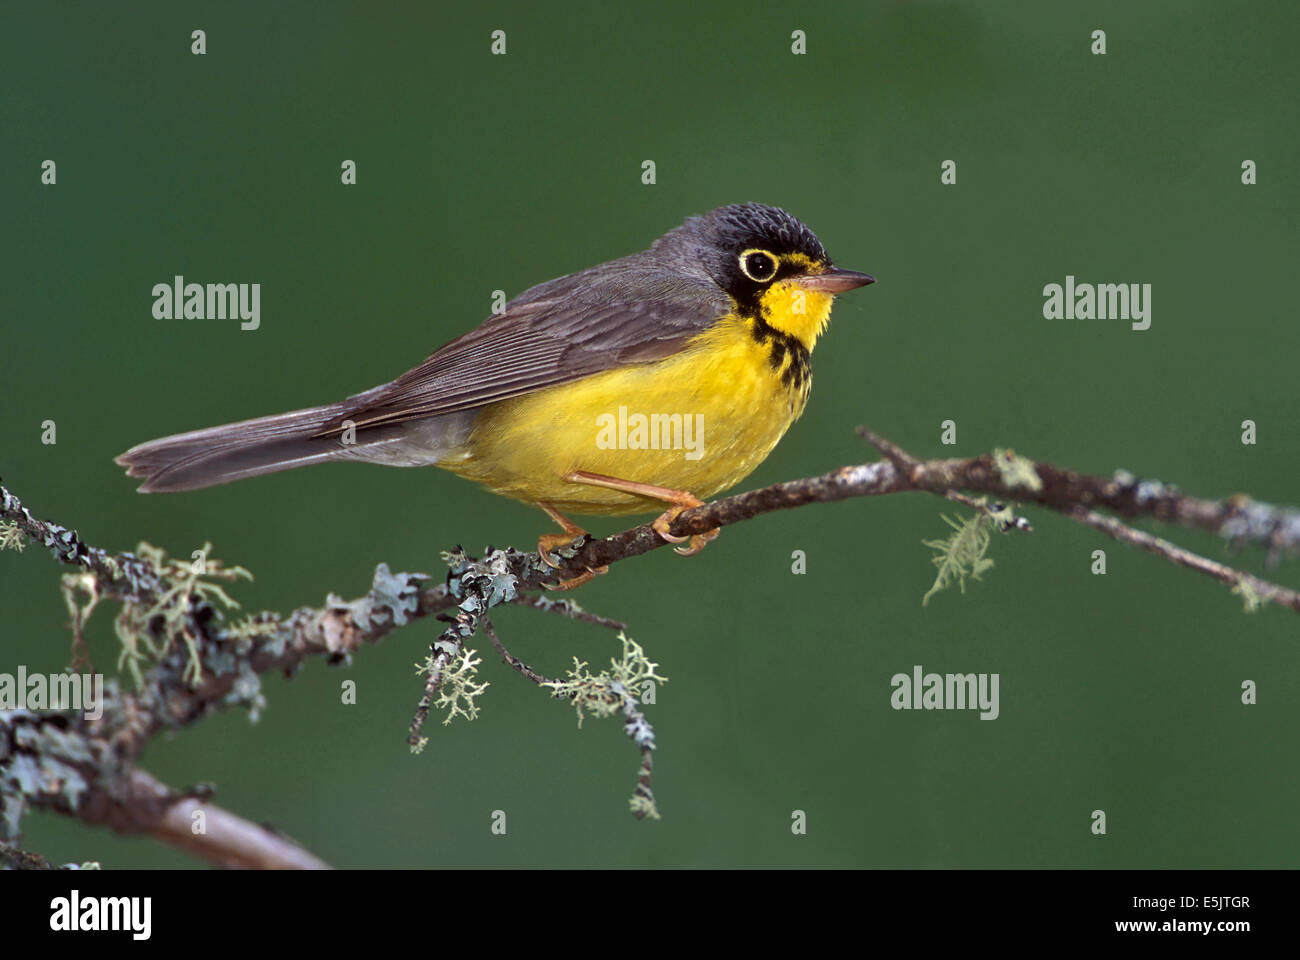 Canada Warbler - Wilsonia canadensis - Adult male Stock Photo